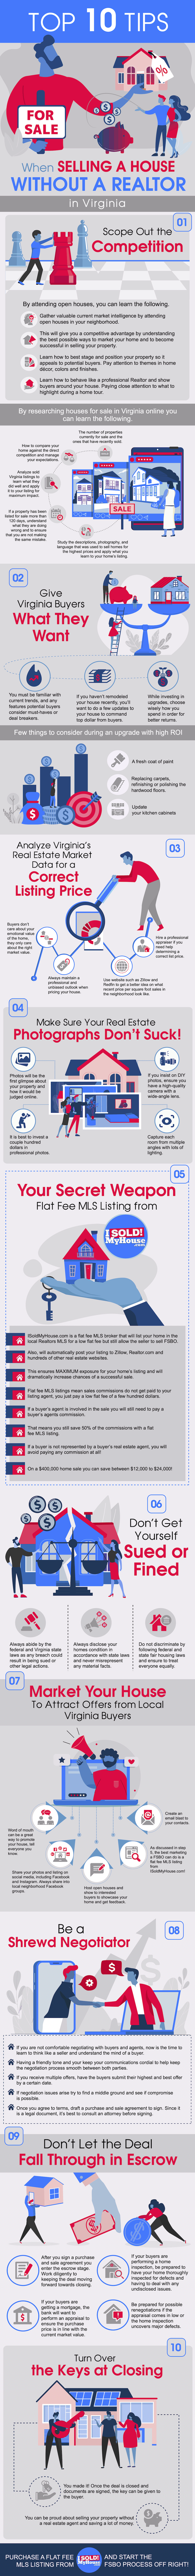 infographic of the 10 steps to sell a house in virginia without an agent